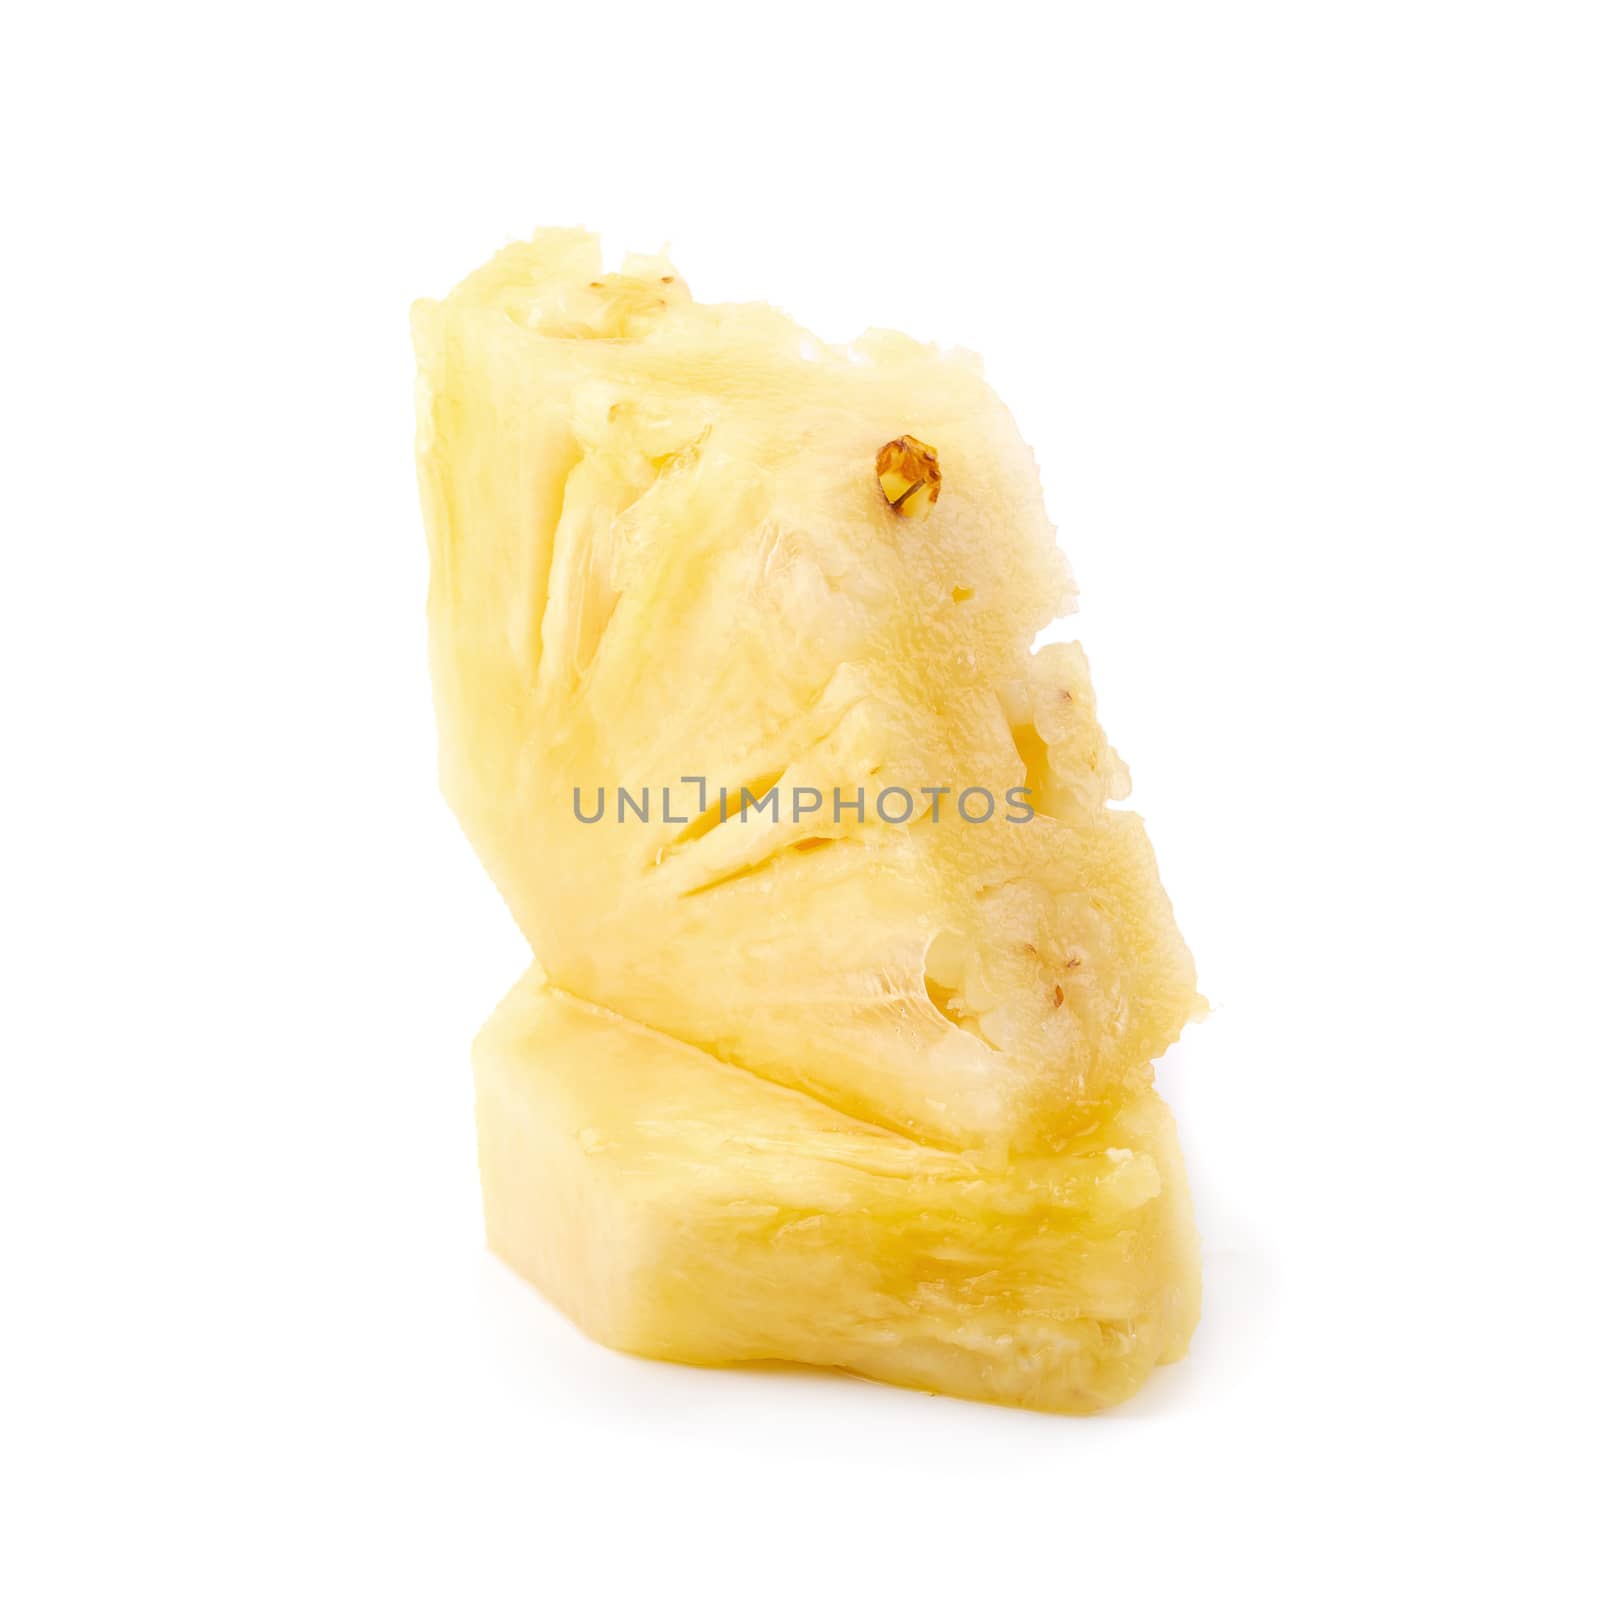 Pineapple Sliced isolated on a white background.